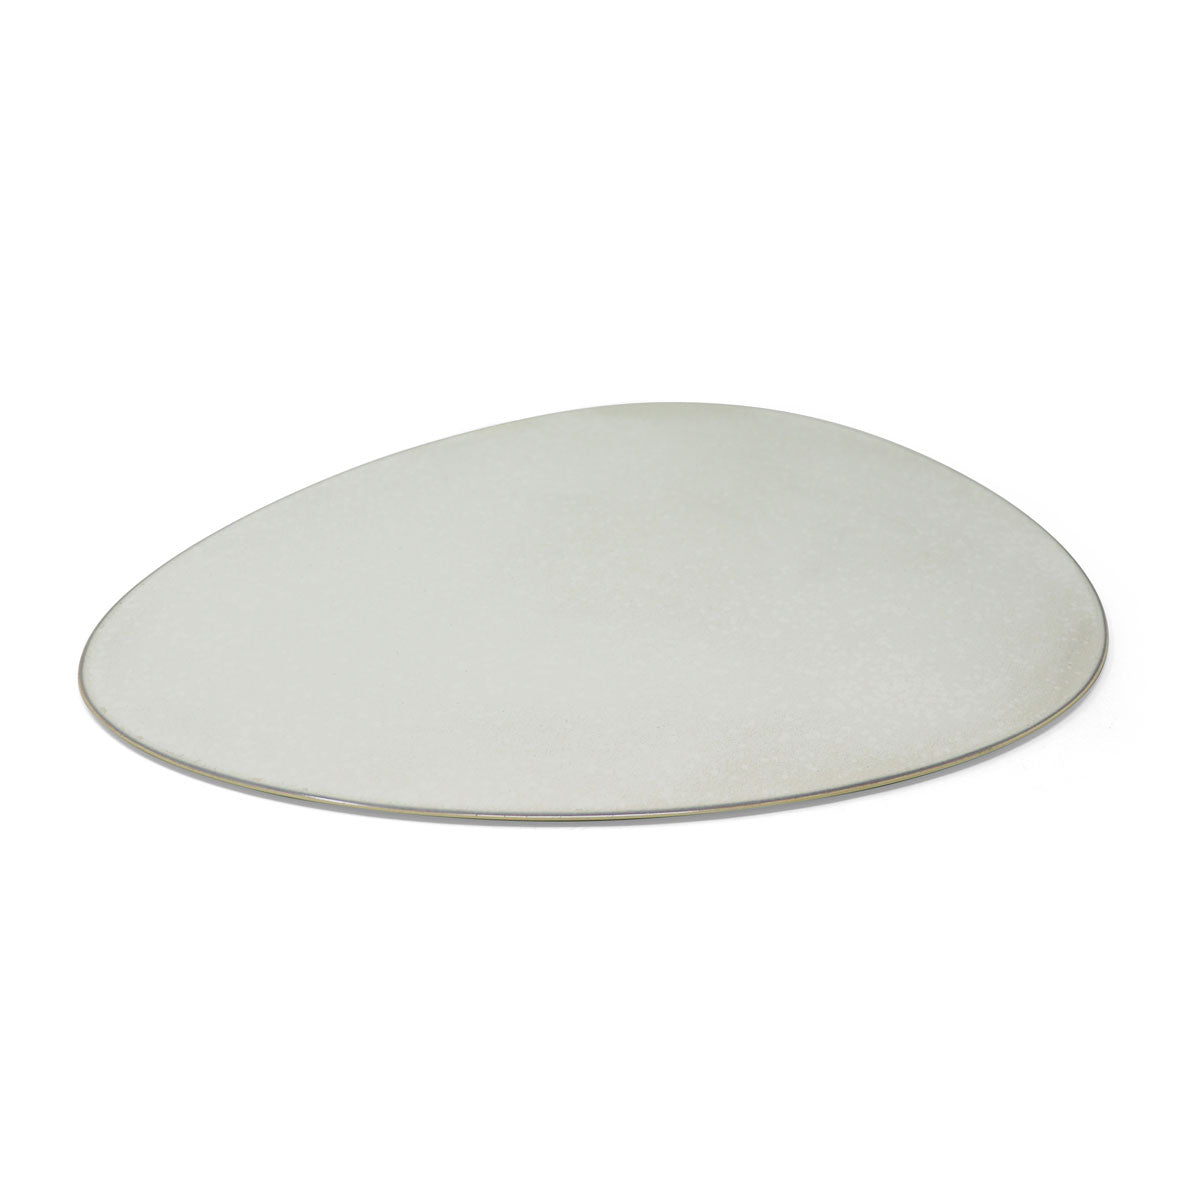 SONG Perle - Oval placemat